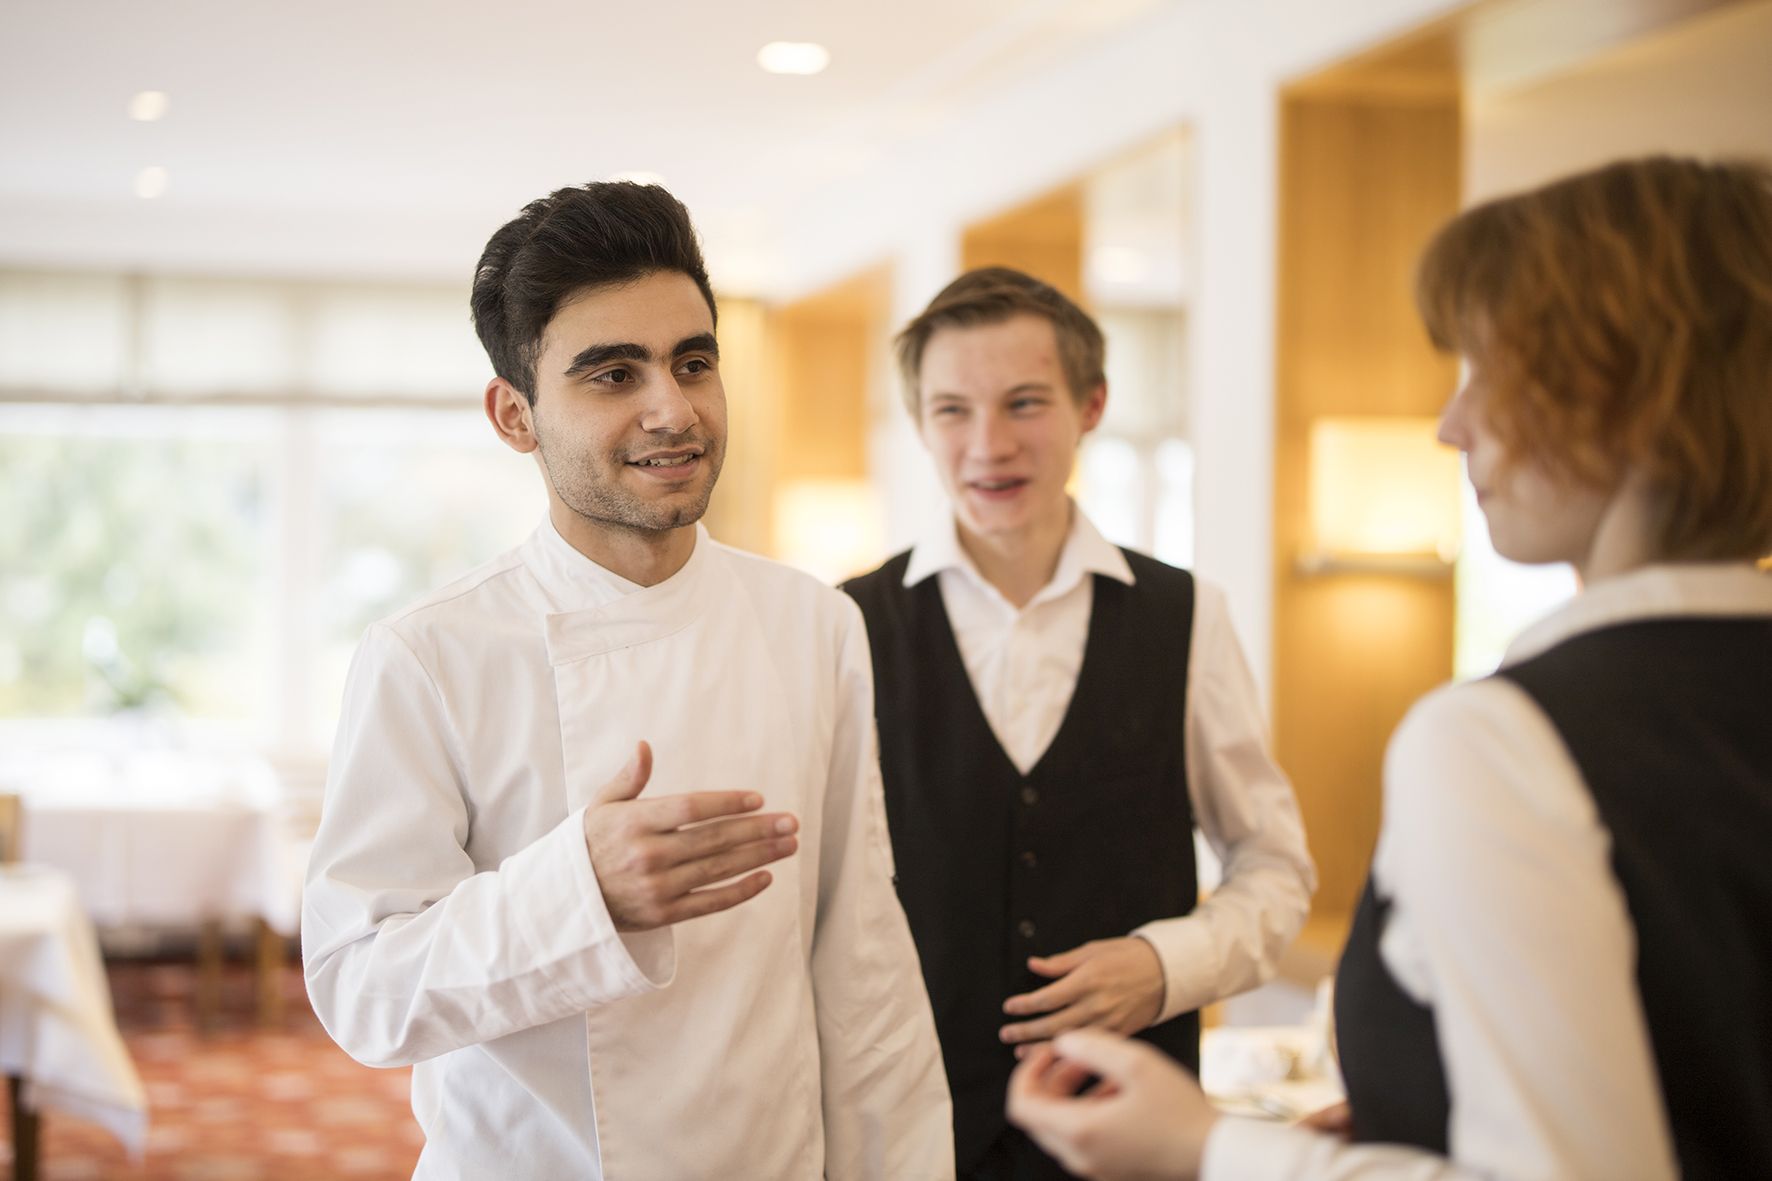 Apprentices from the kitchen and service are talking and standing in the restaurant.